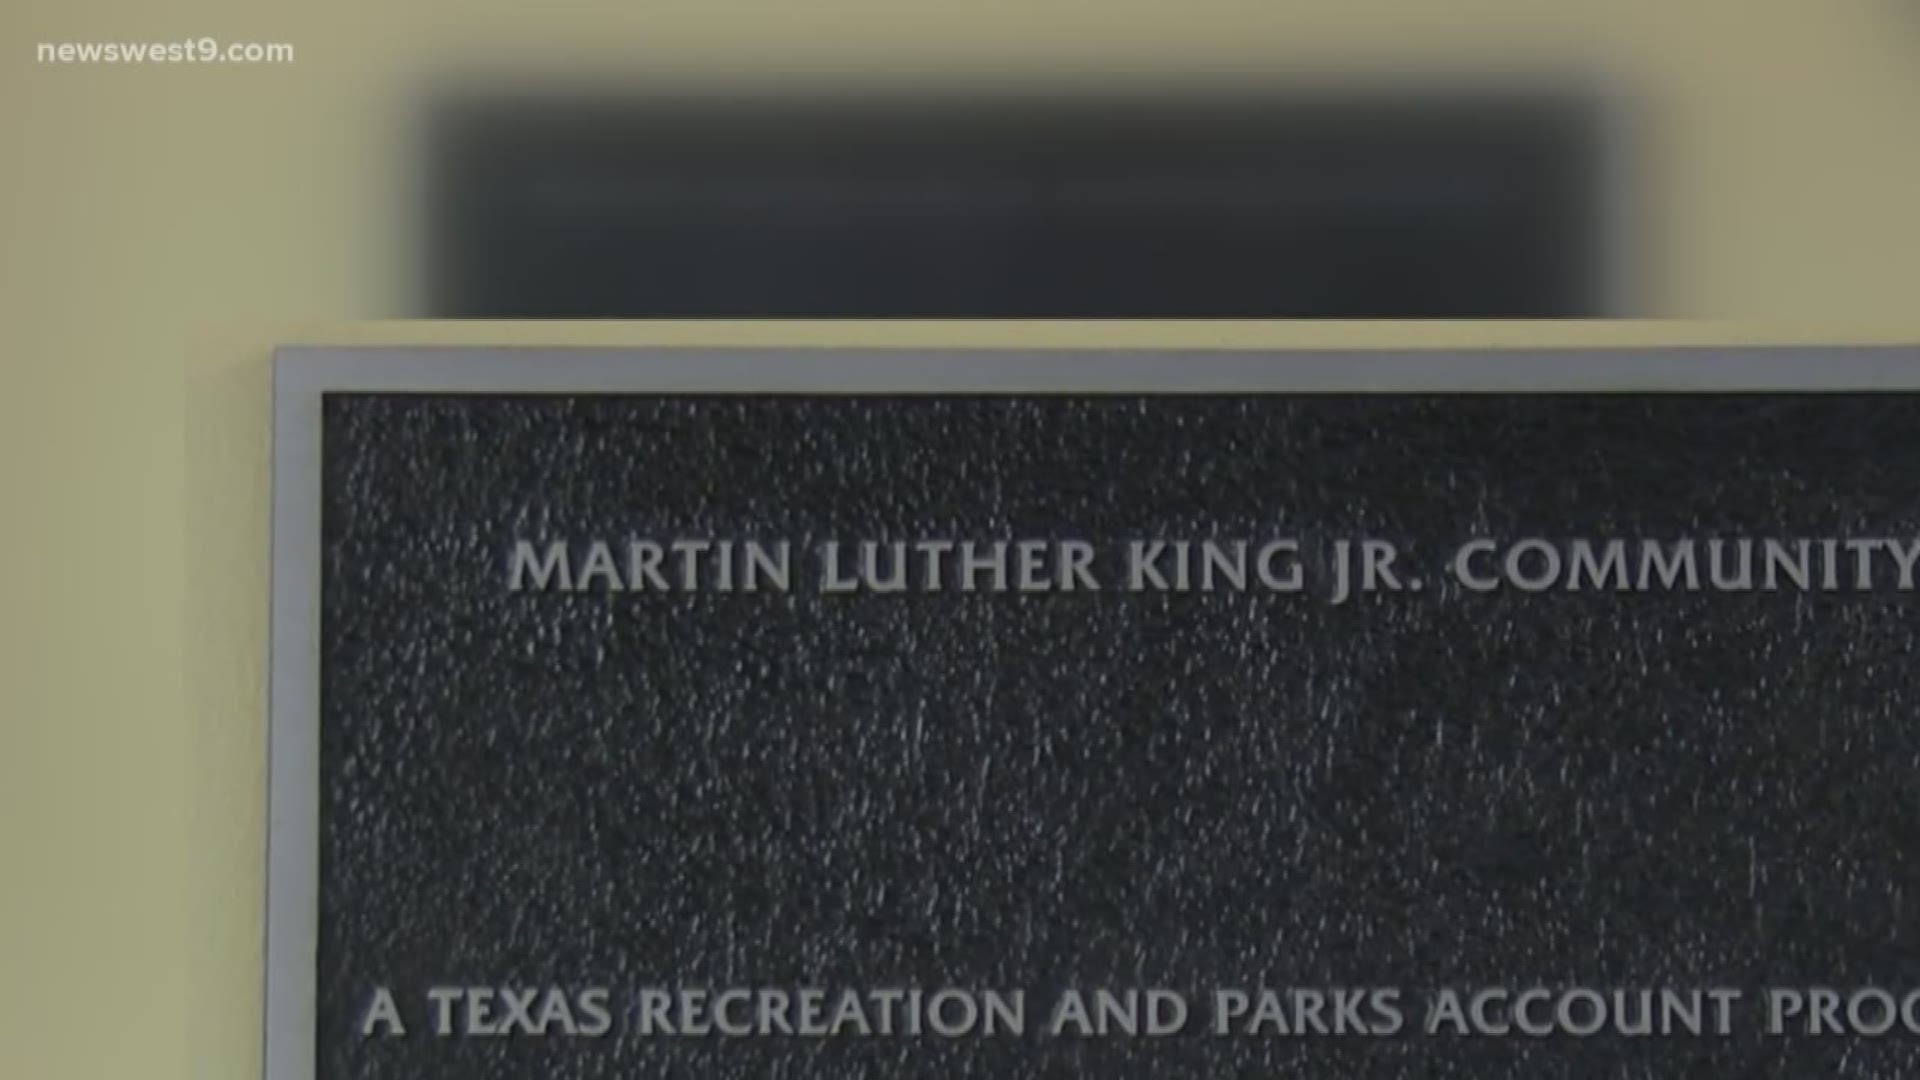 On Monday, the MLK Community Center will cherish the legacy of pivotal civil rights leader, Martin Luther King Jr.